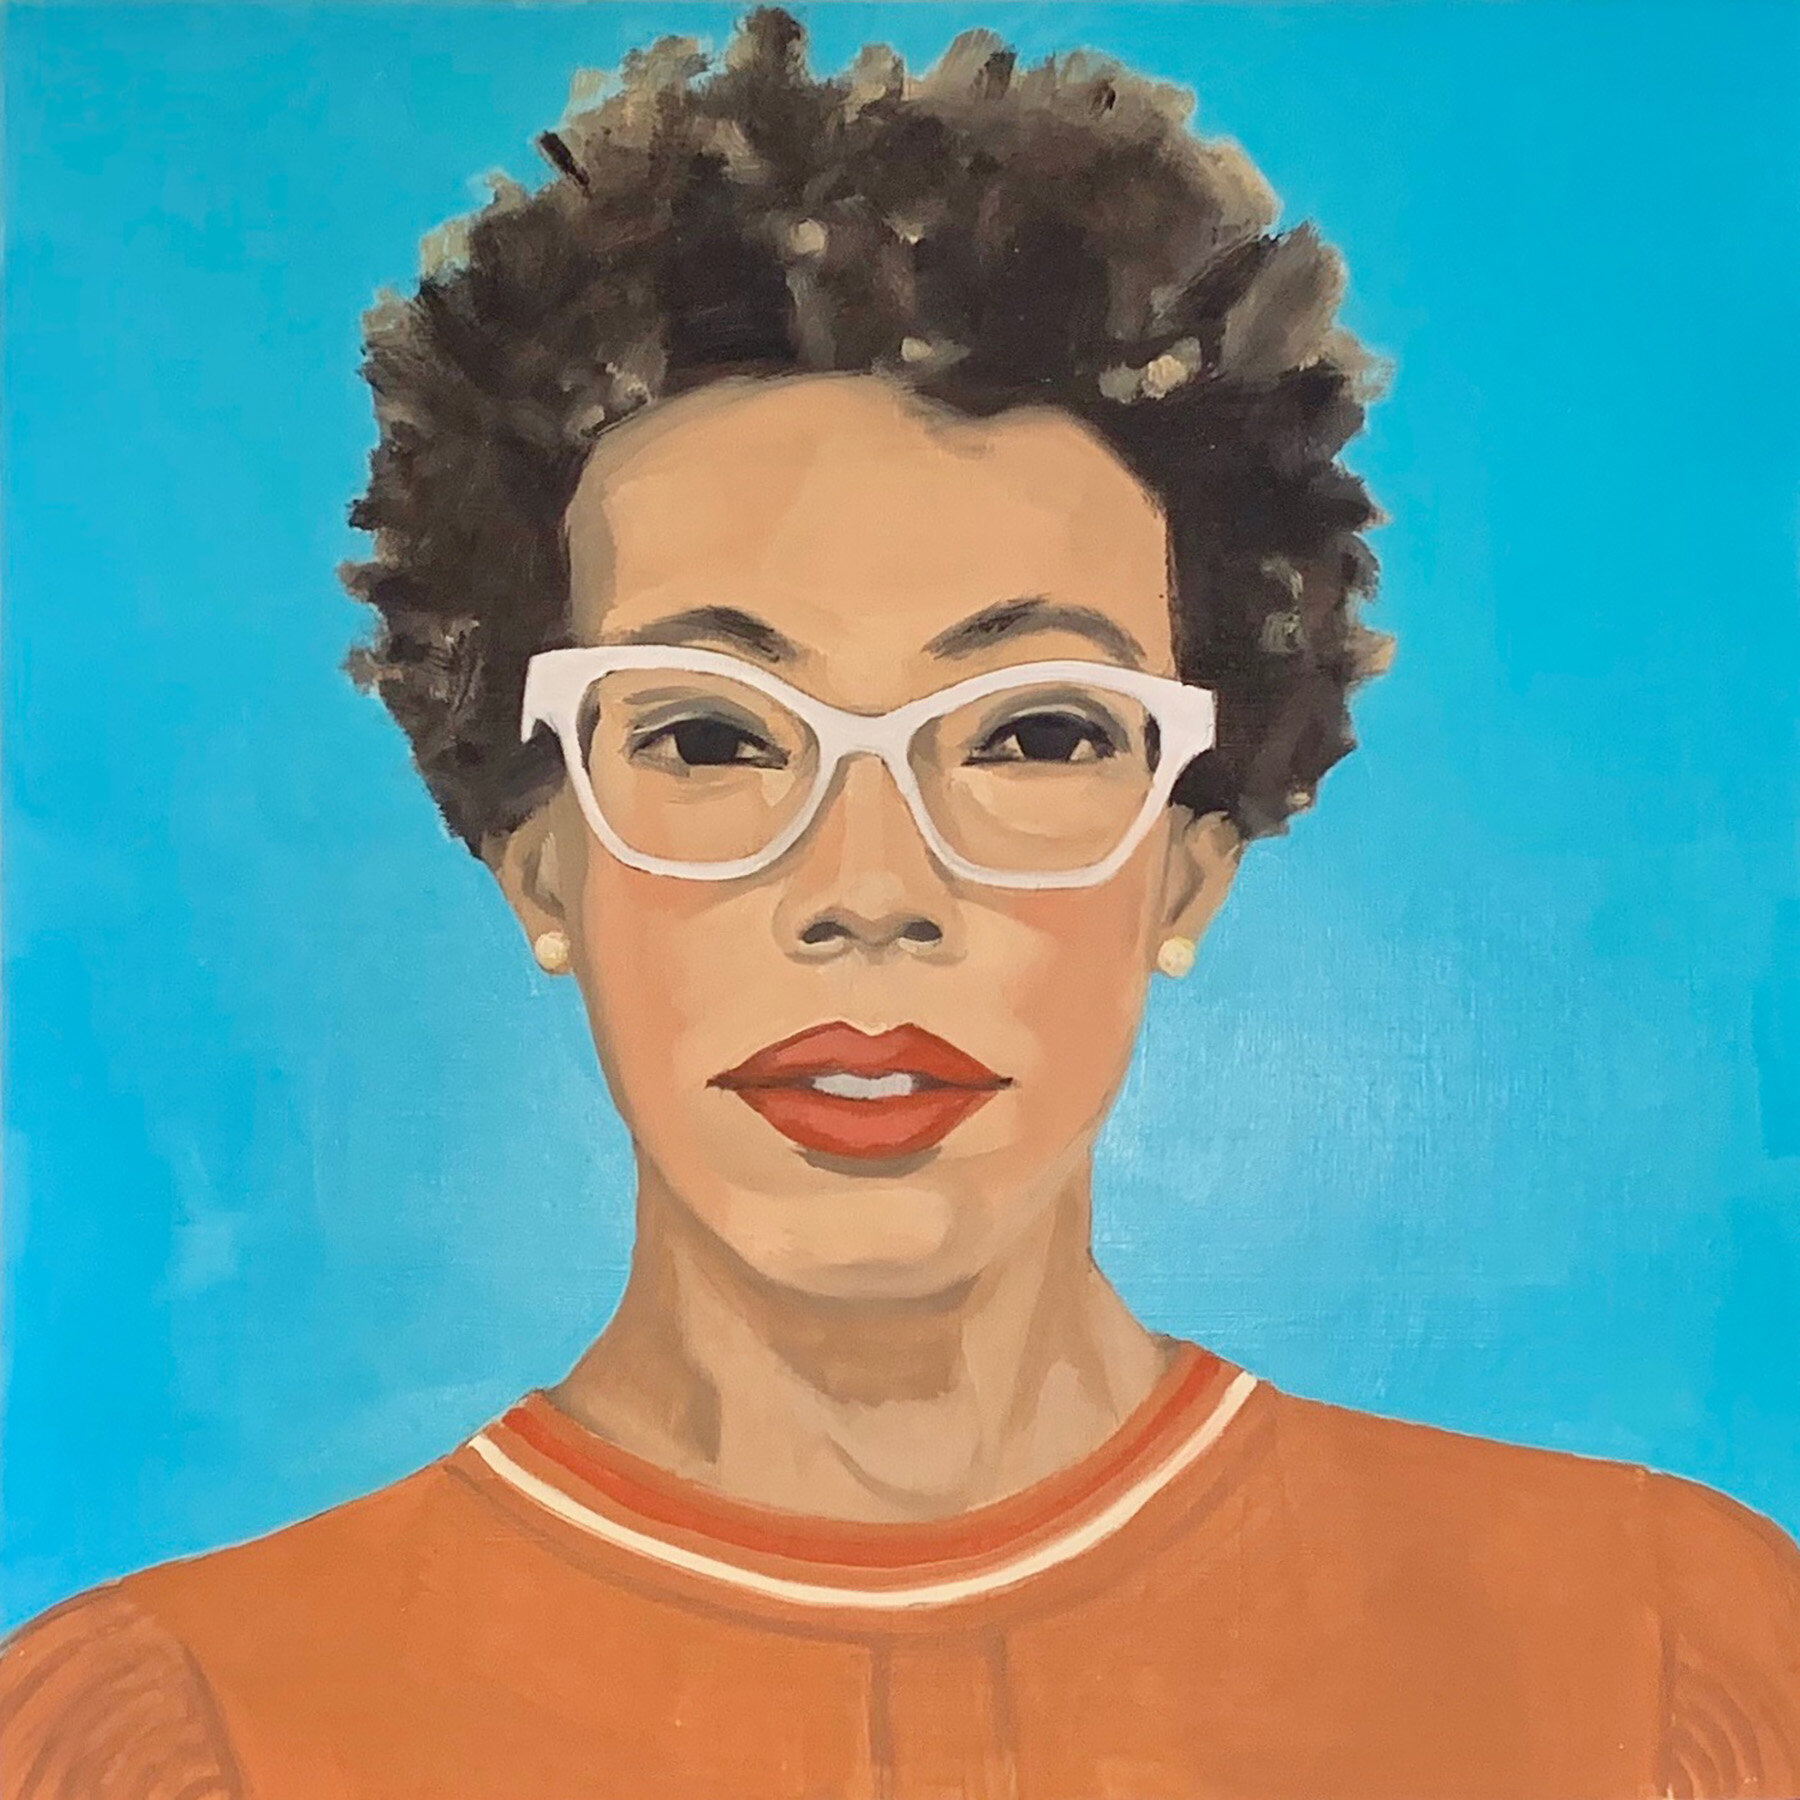 Newman_Amy Sherald and Her Stripes_2.jpg